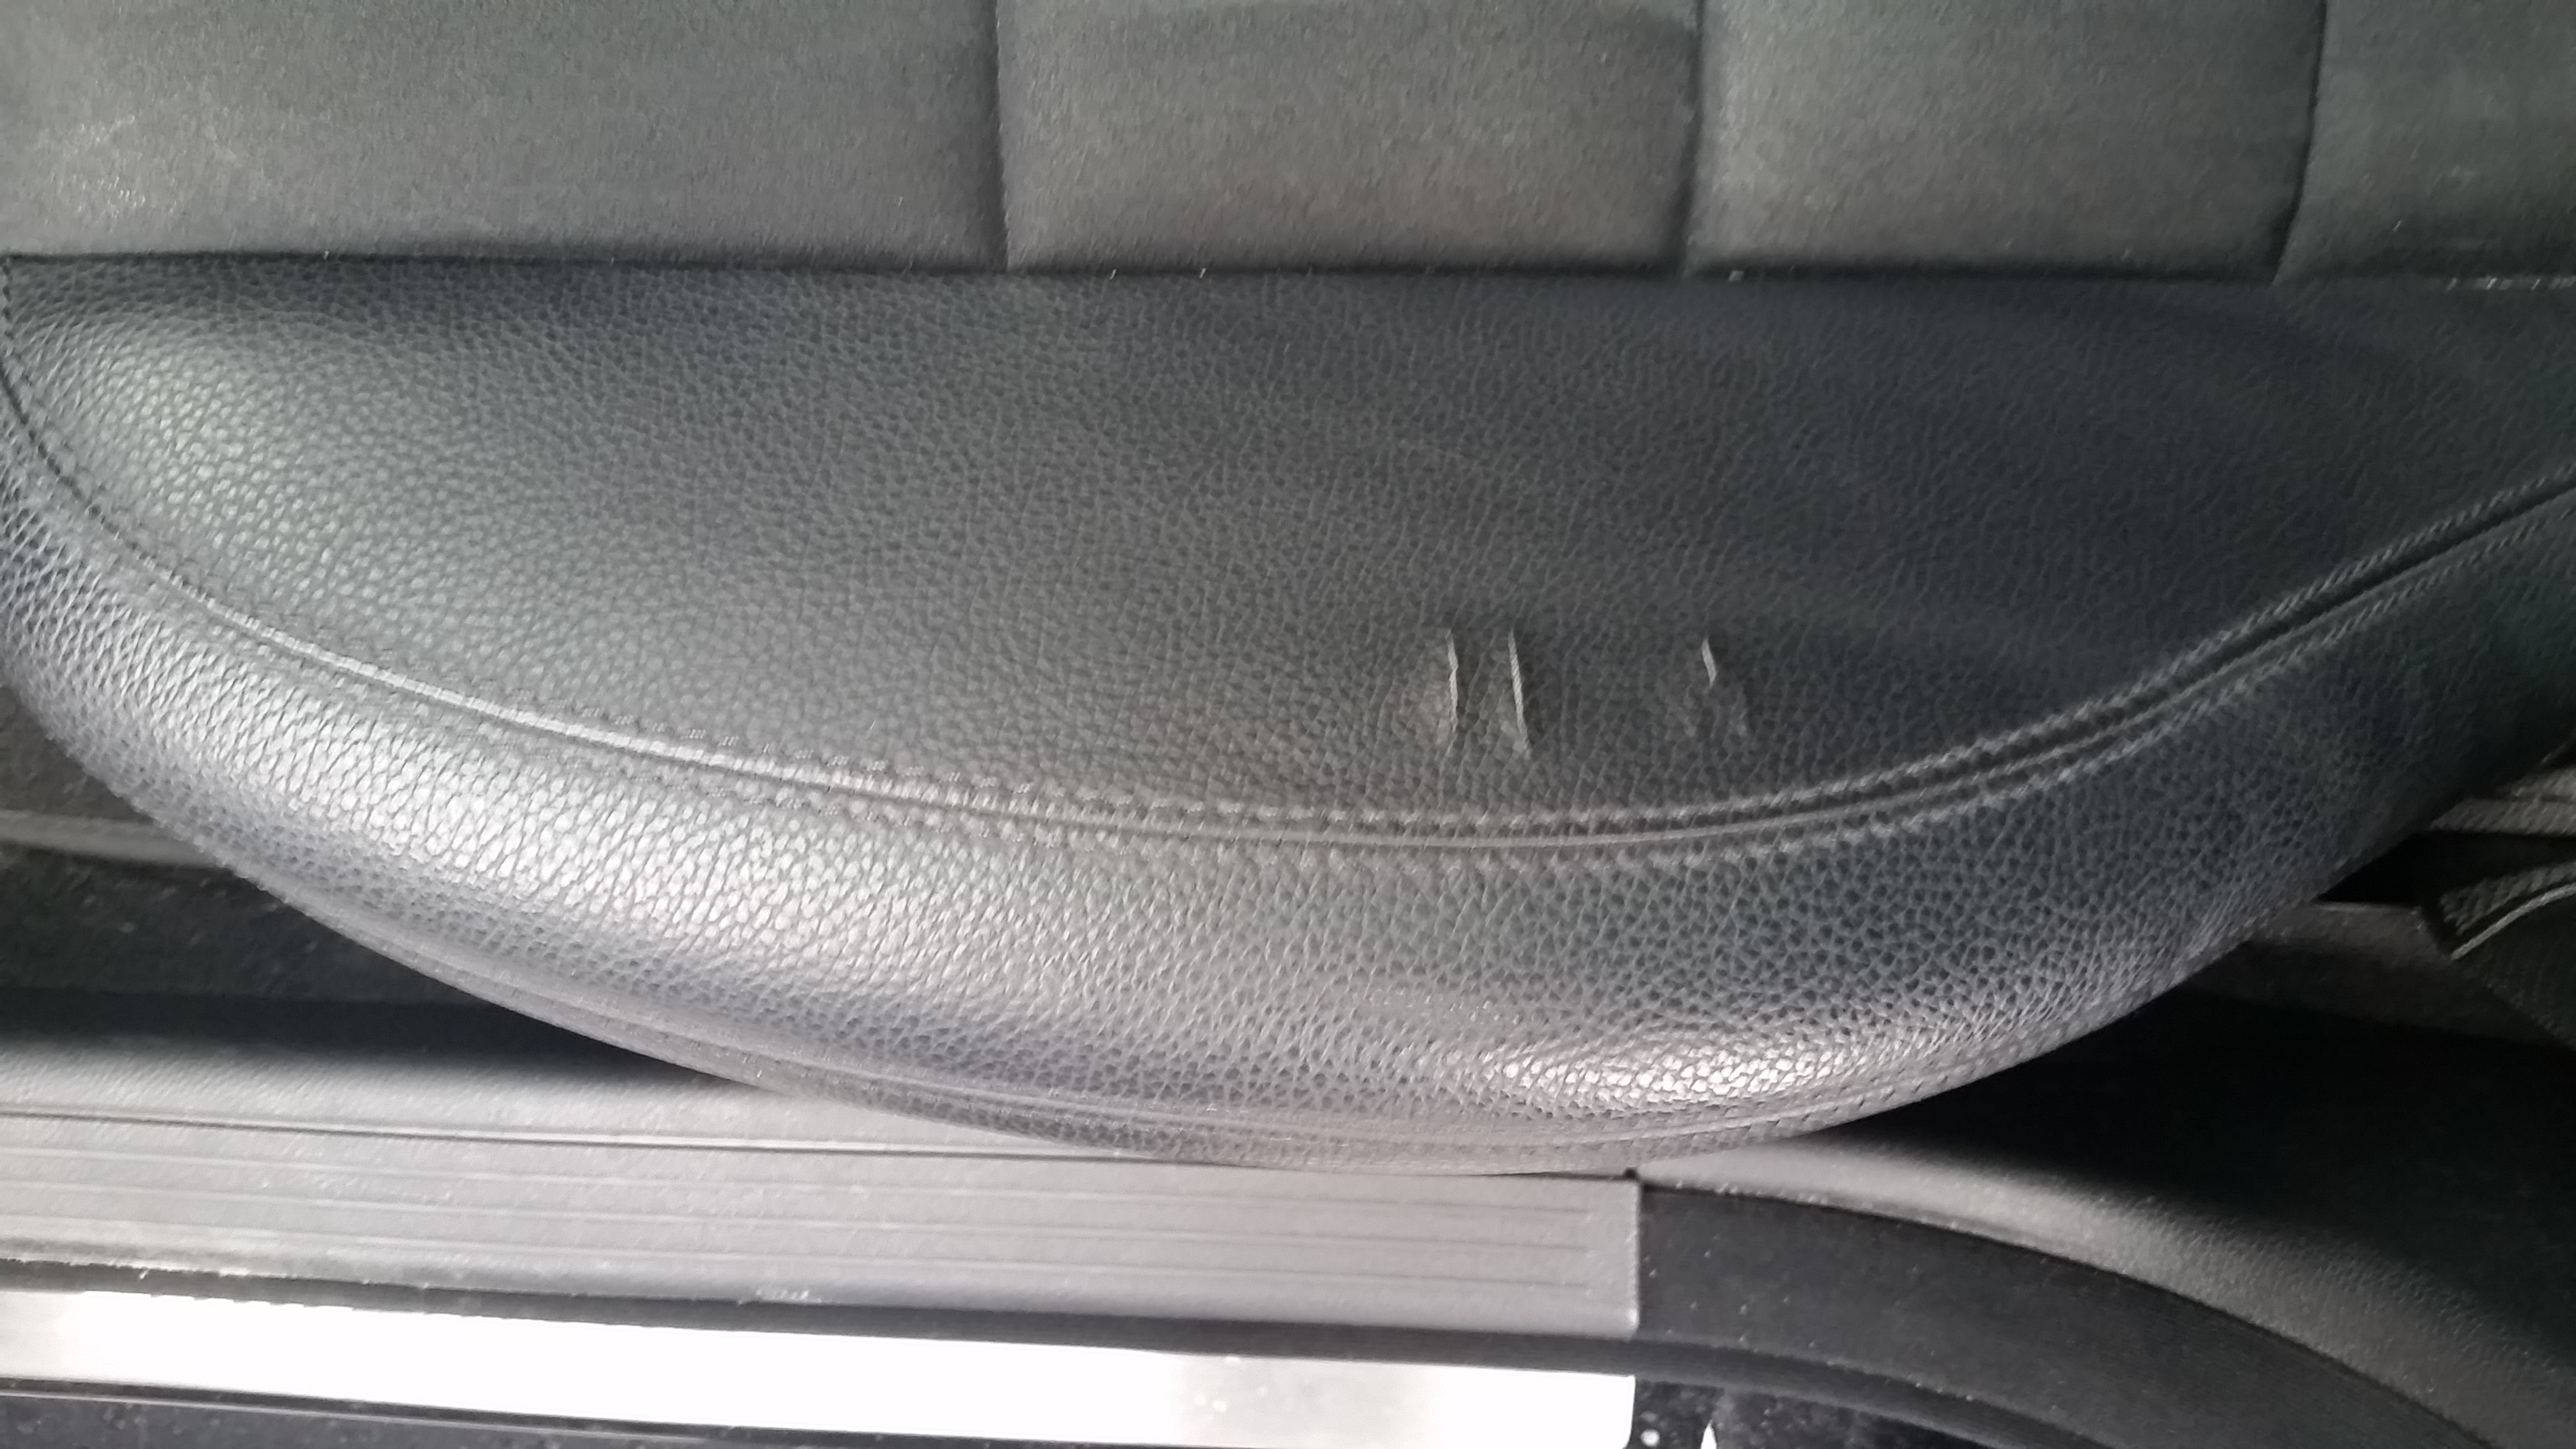 W204 seat bottom repair/replacement -  Forums